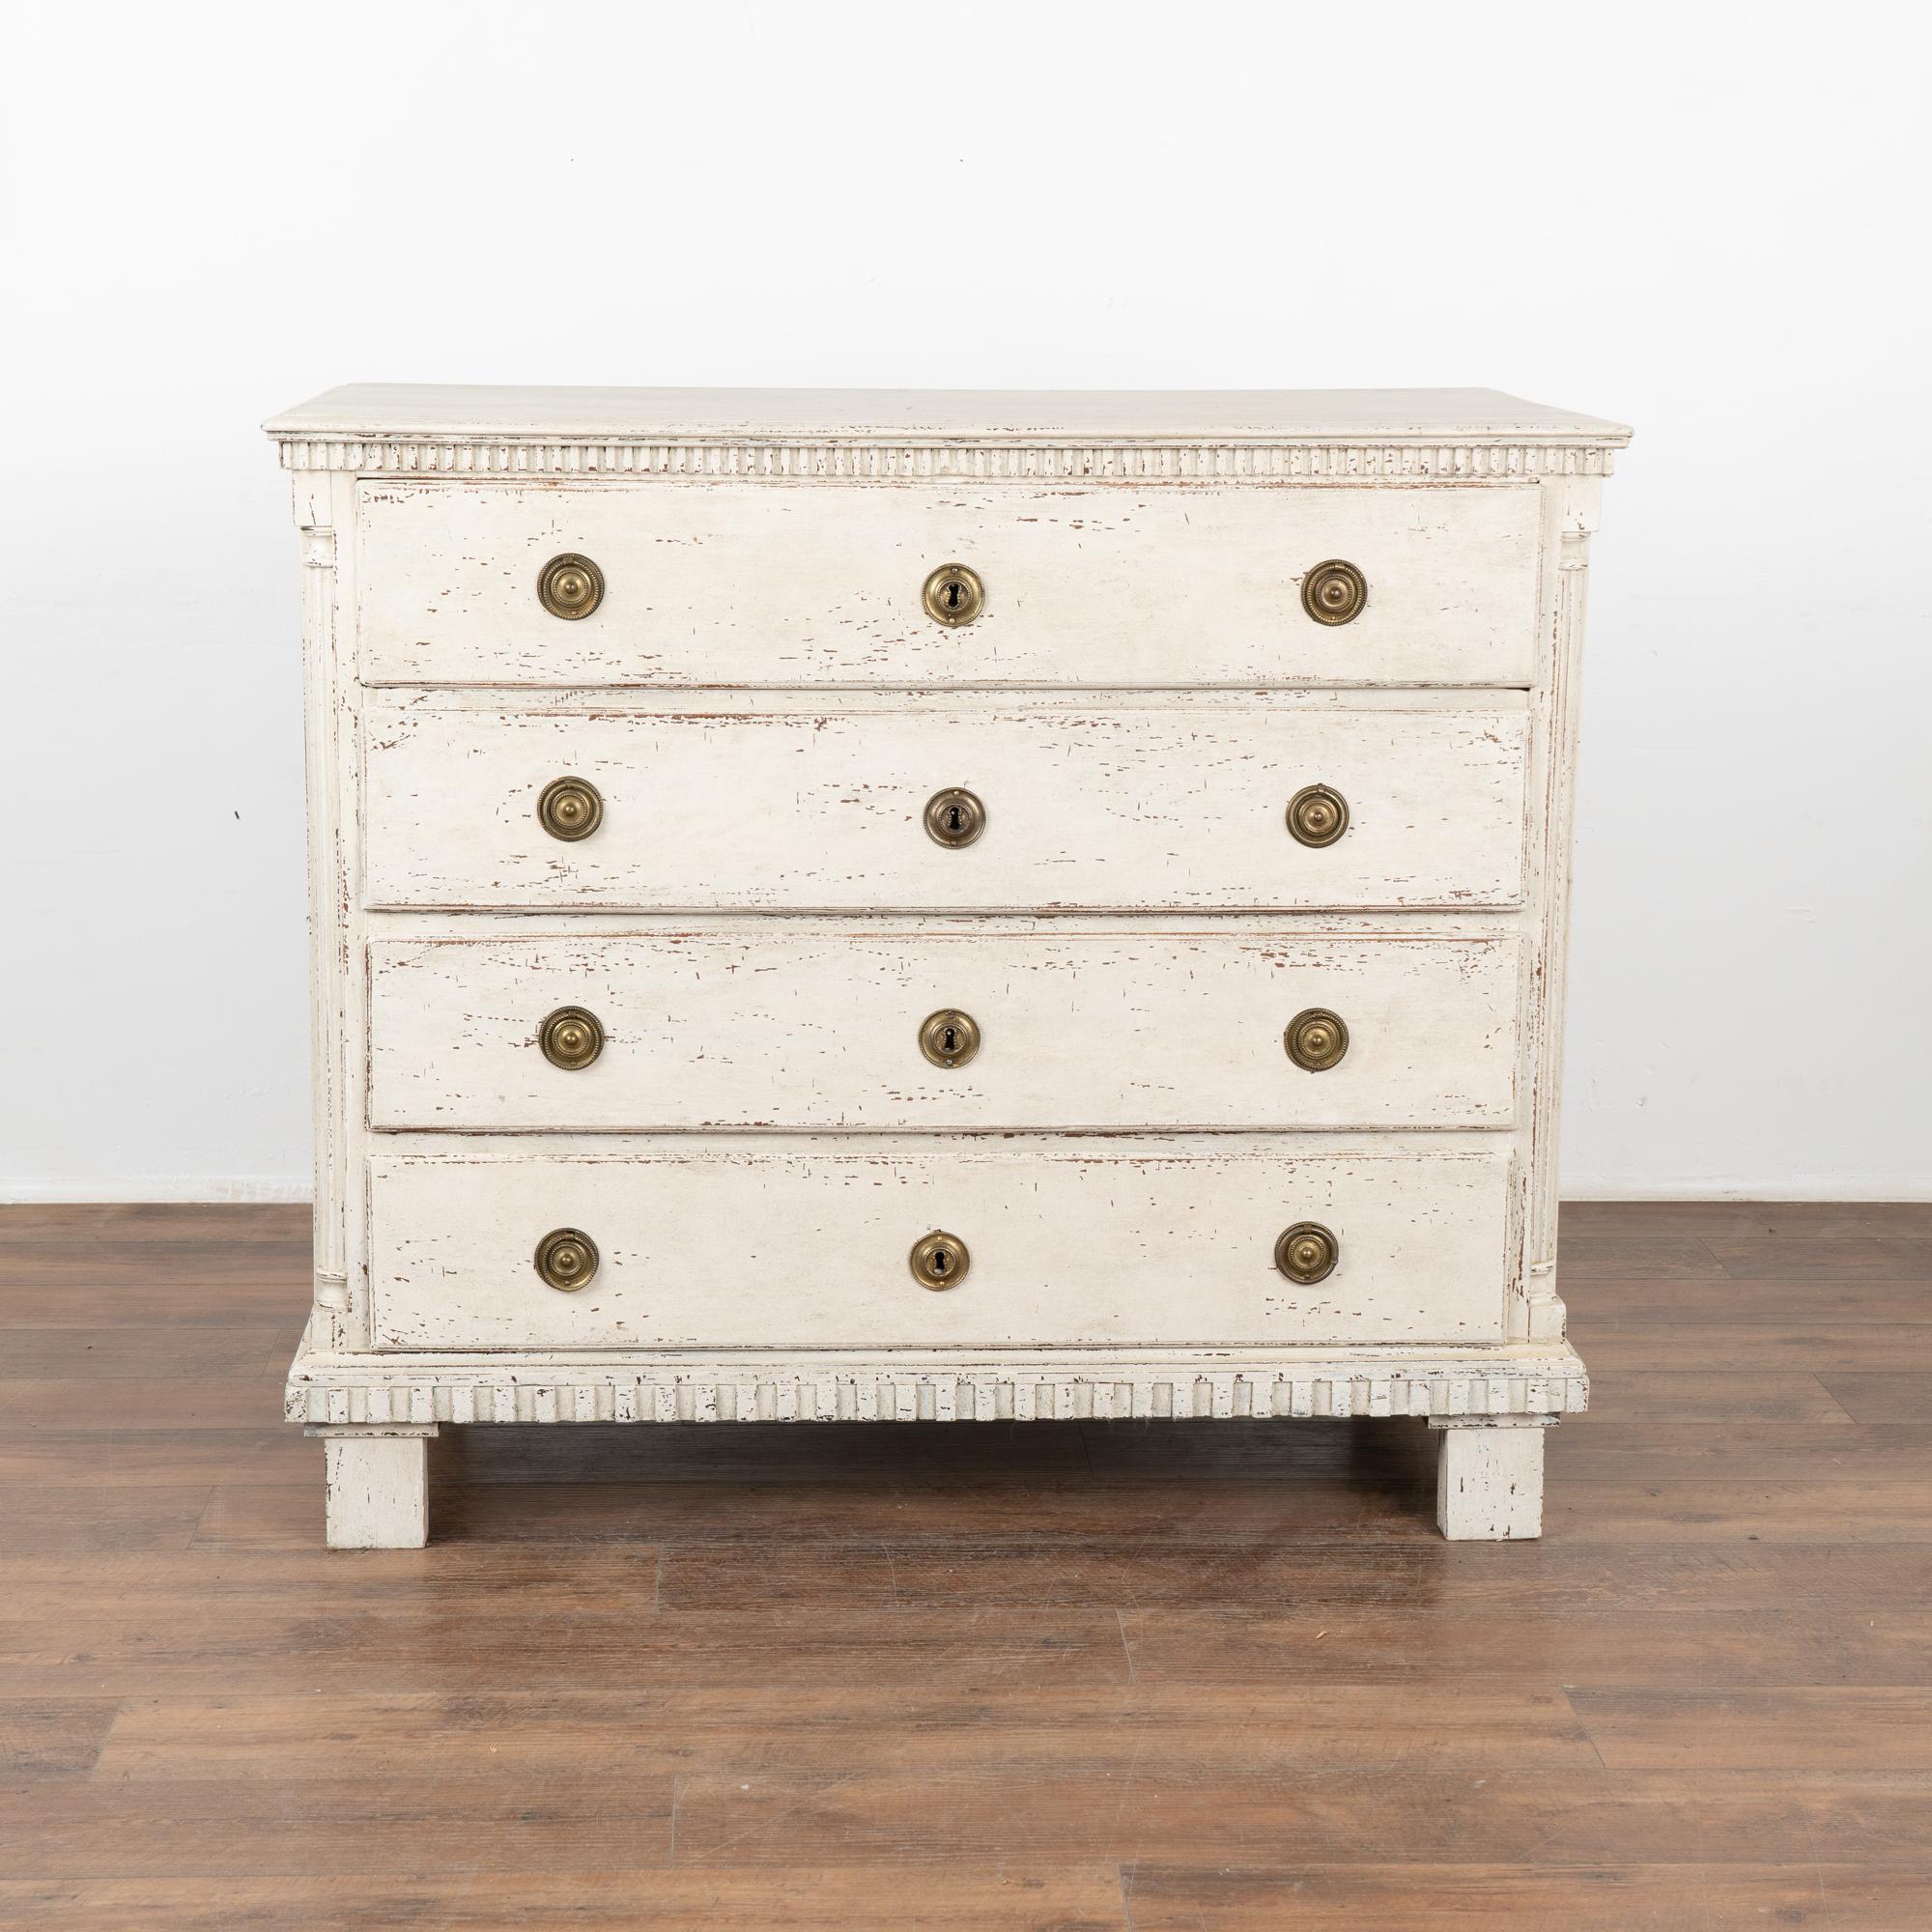 Danish Large White Painted Chest of Four Drawers, Denmark circa 1800